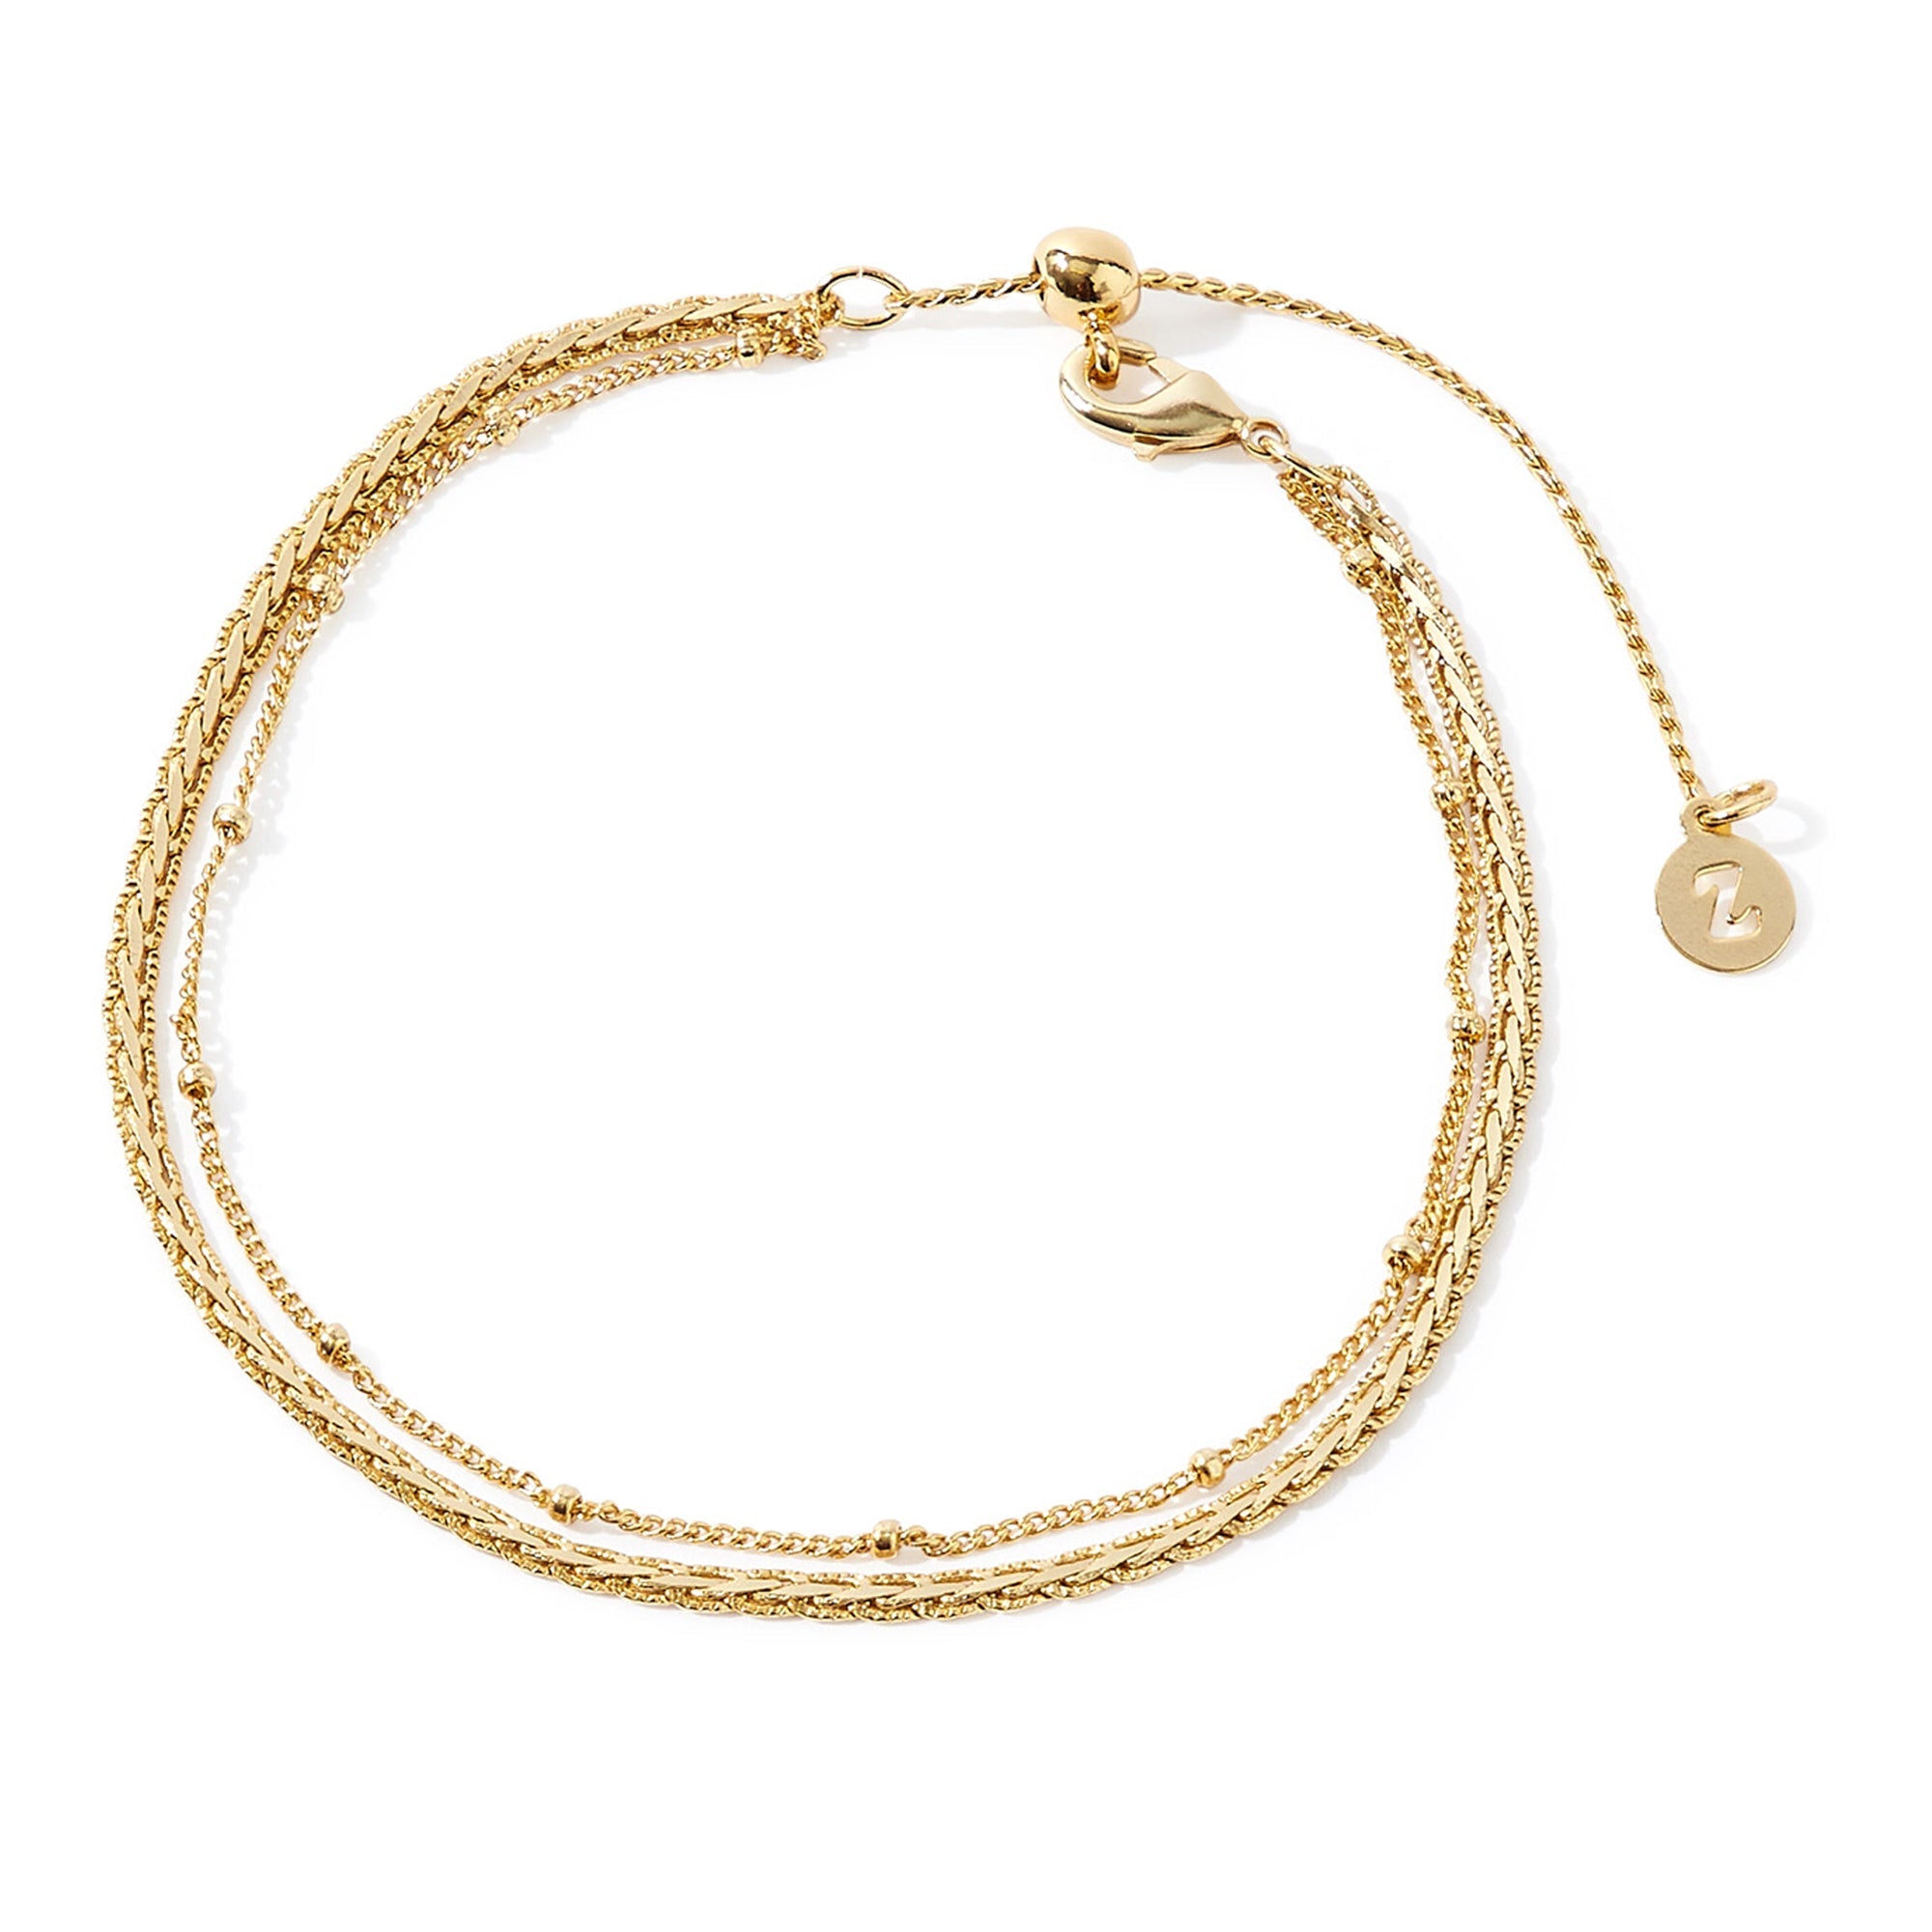 Real Gold Plated 2 Pack Layer Fancy Chain Bracelet For Women By Accessorize London